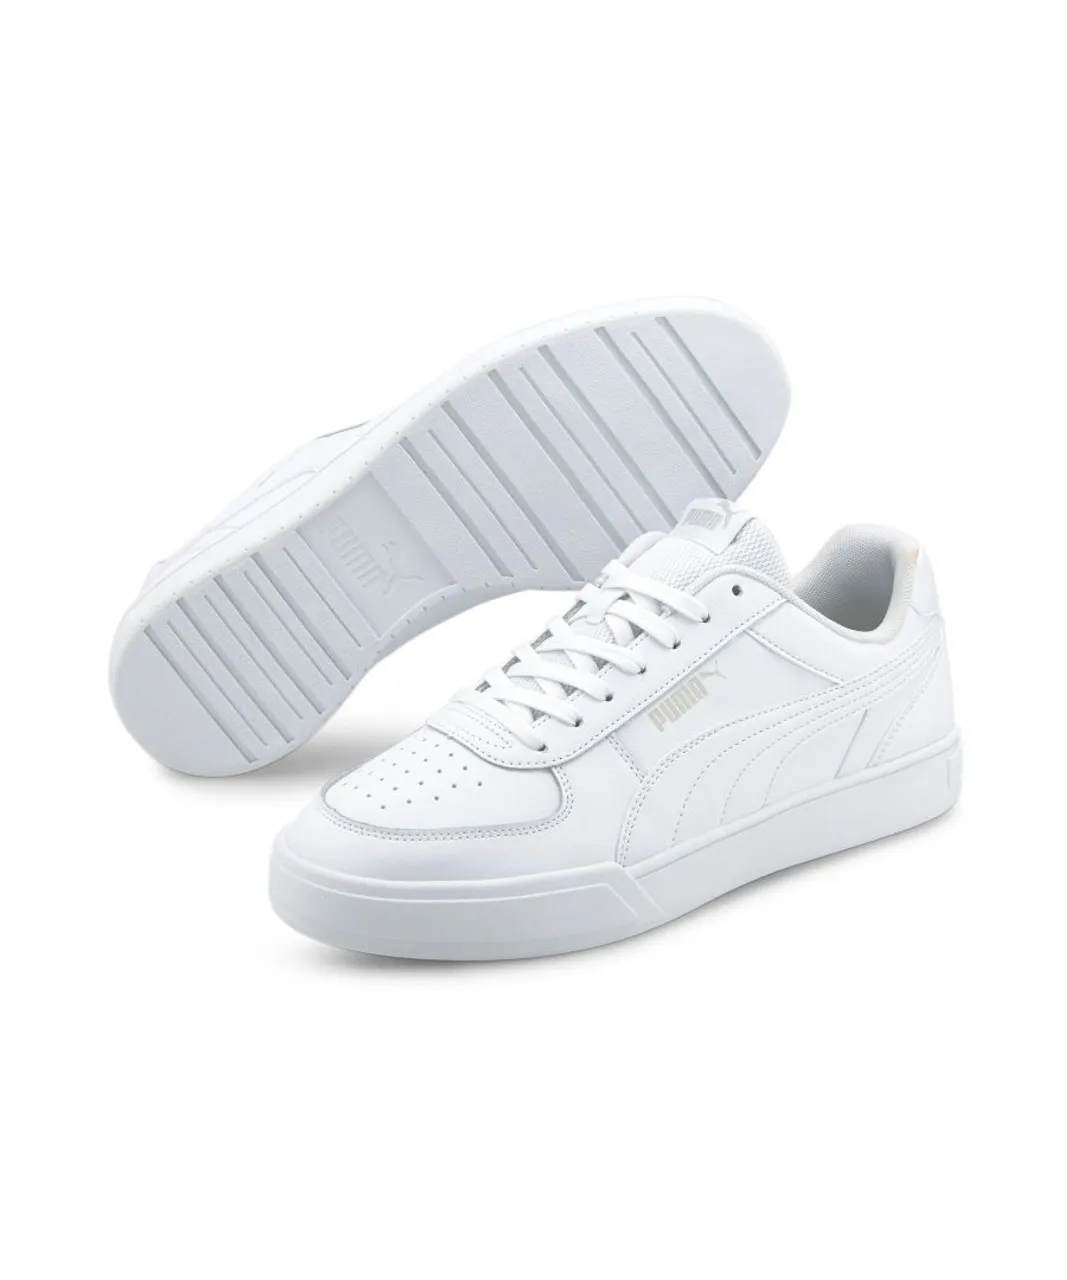 Puma Unisex Caven Trainers - White Leather